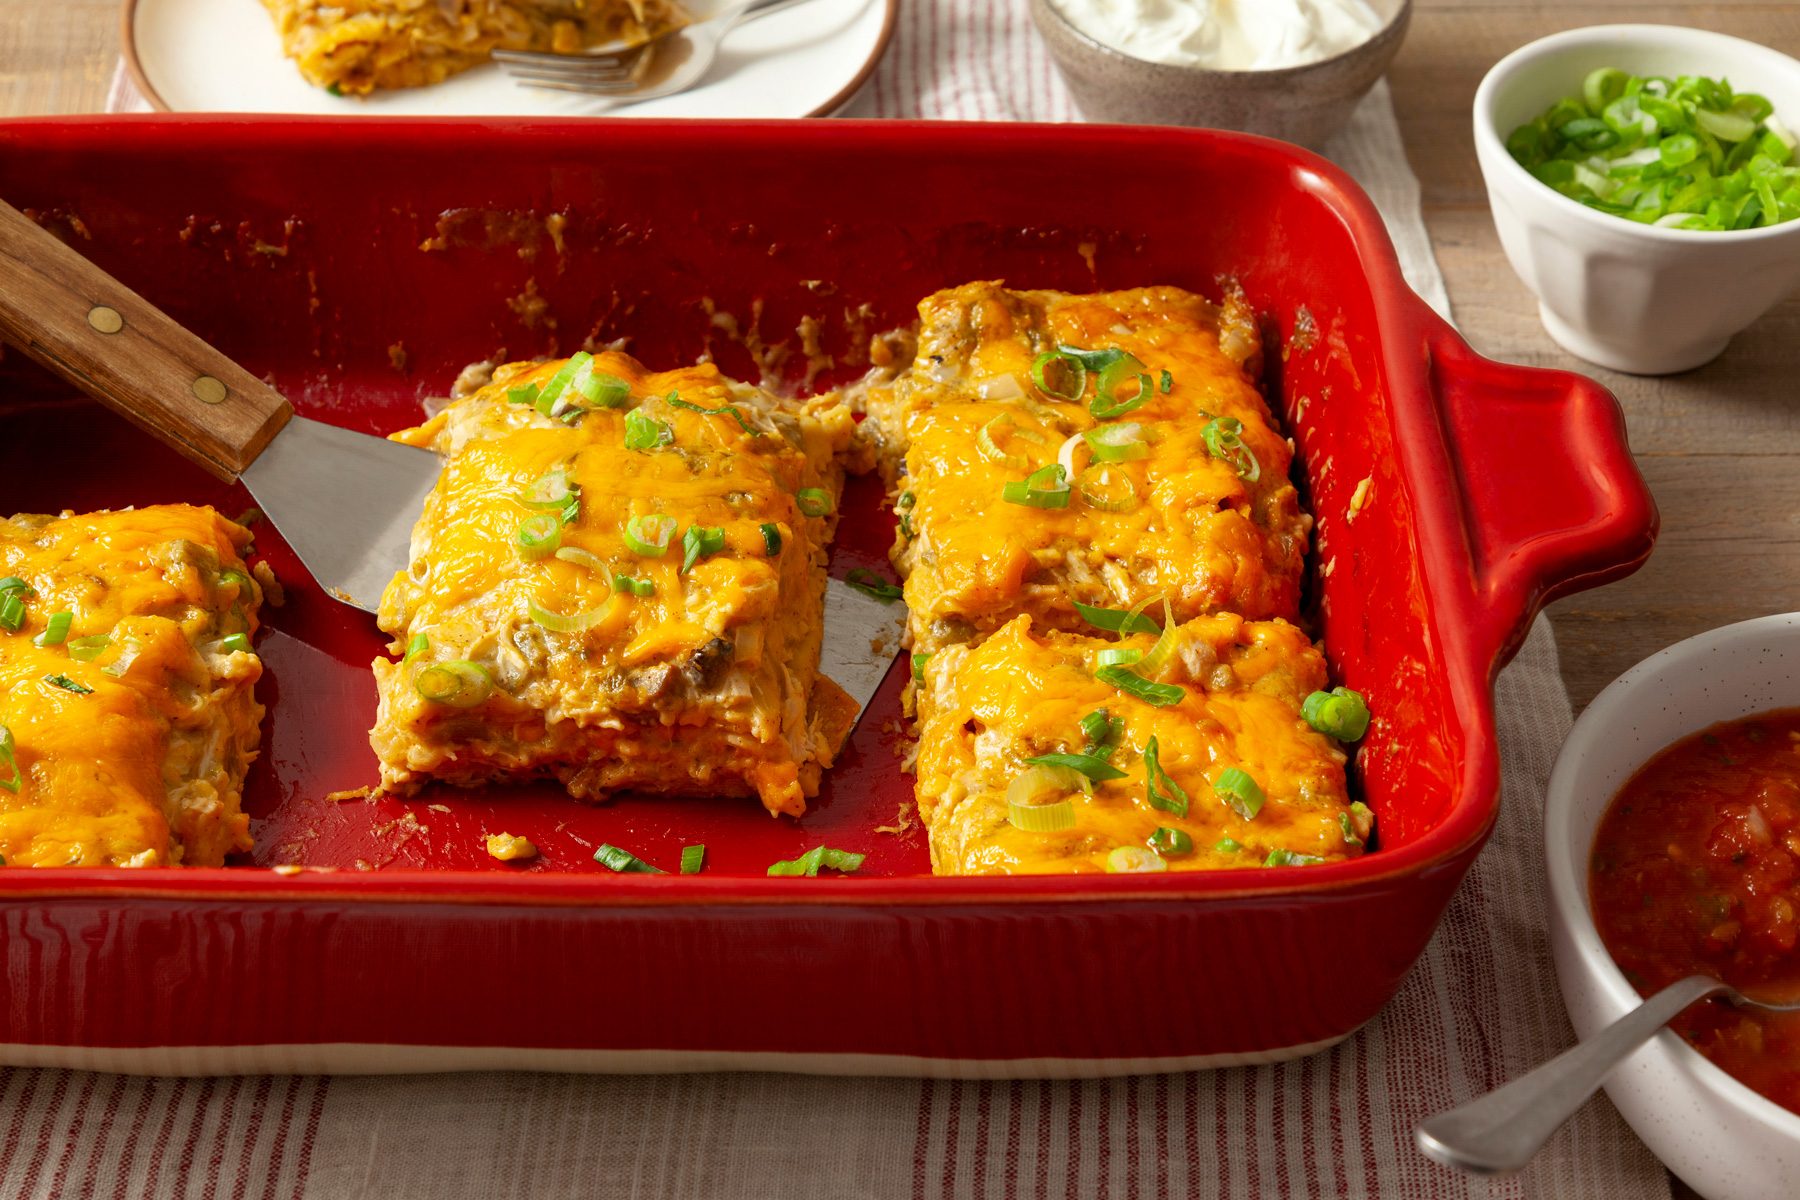 A red dish with chicken tortilla casserole in it